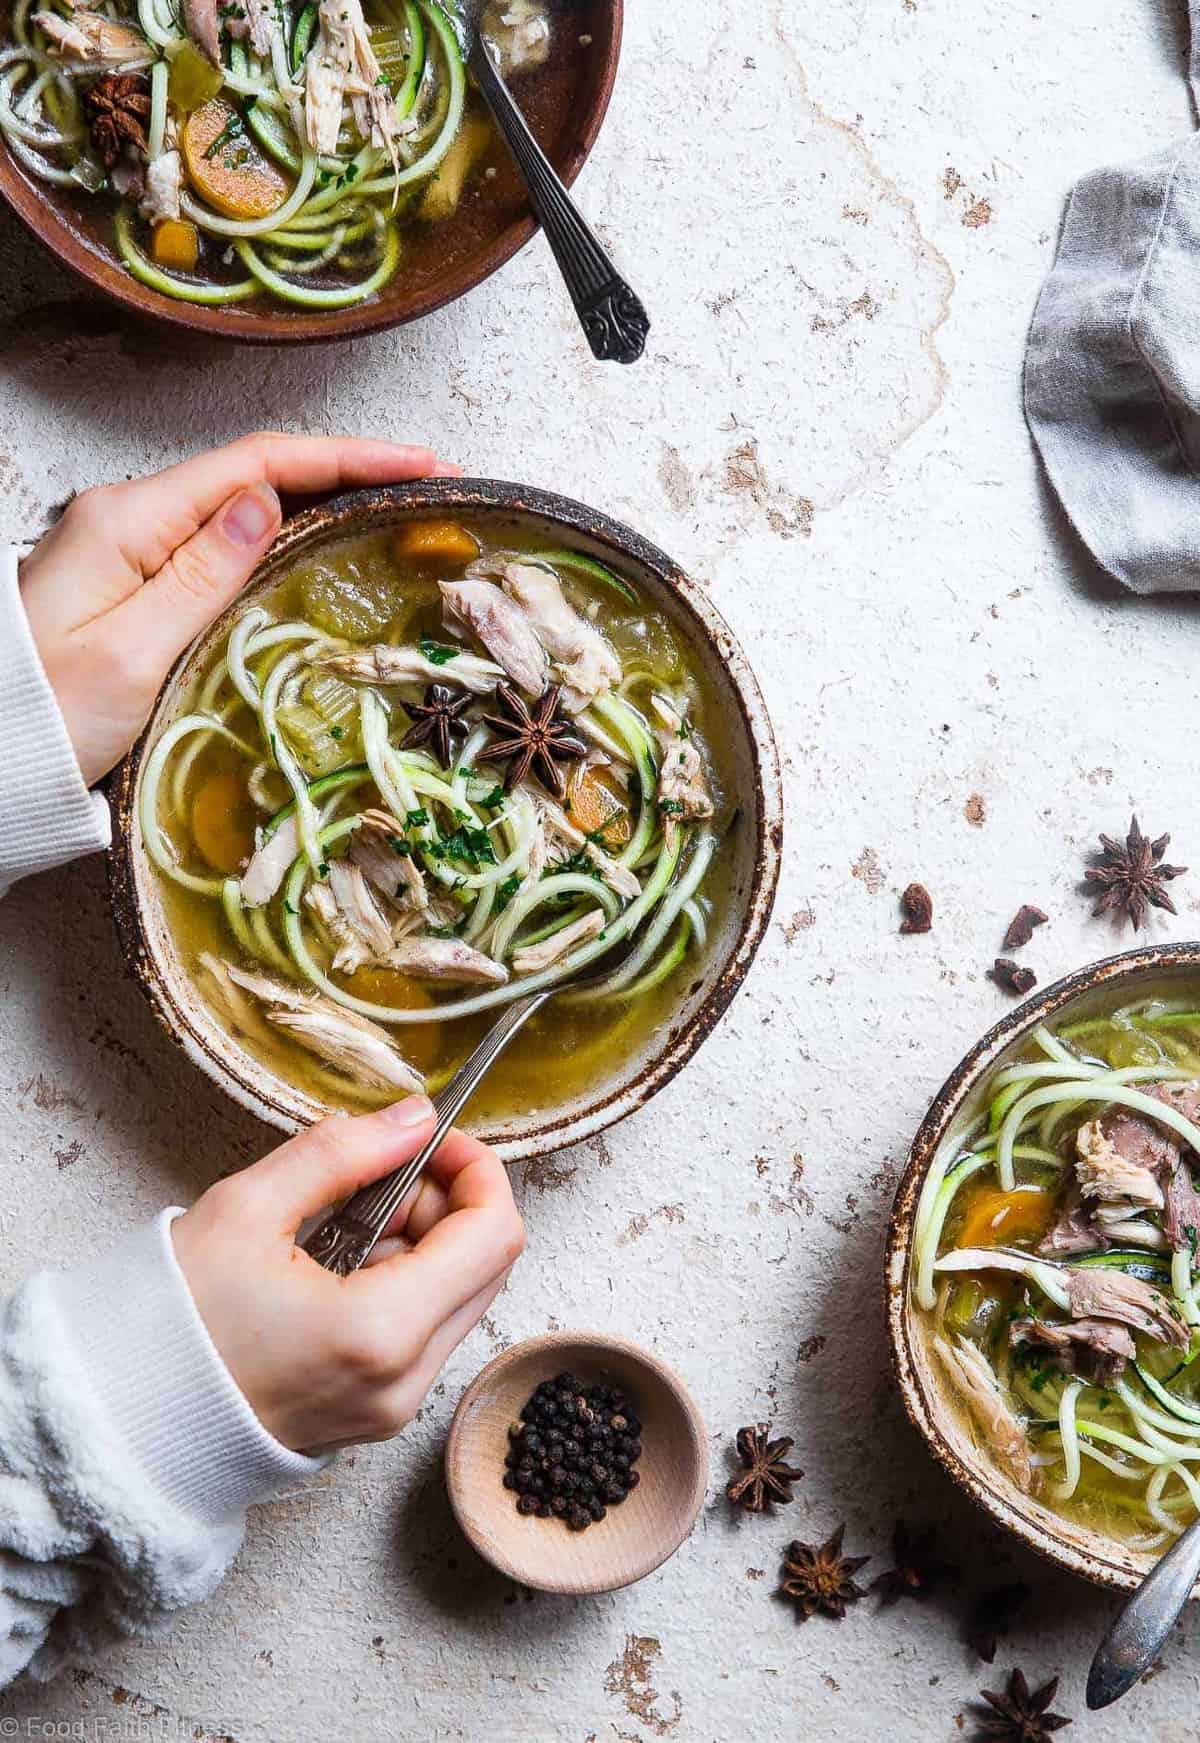 Low carb Chicken Zoodle Soup - This easy homemade healthy keto Chicken Zoodle Soup uses zucchini noodles so it's gluten free, low carb, paleo, whole30 AND packed with protein! You won't miss the noodles! | #Foodfaithfitness | #Glutenfree #Lowcarb #Keto #Whole30 #Paleo